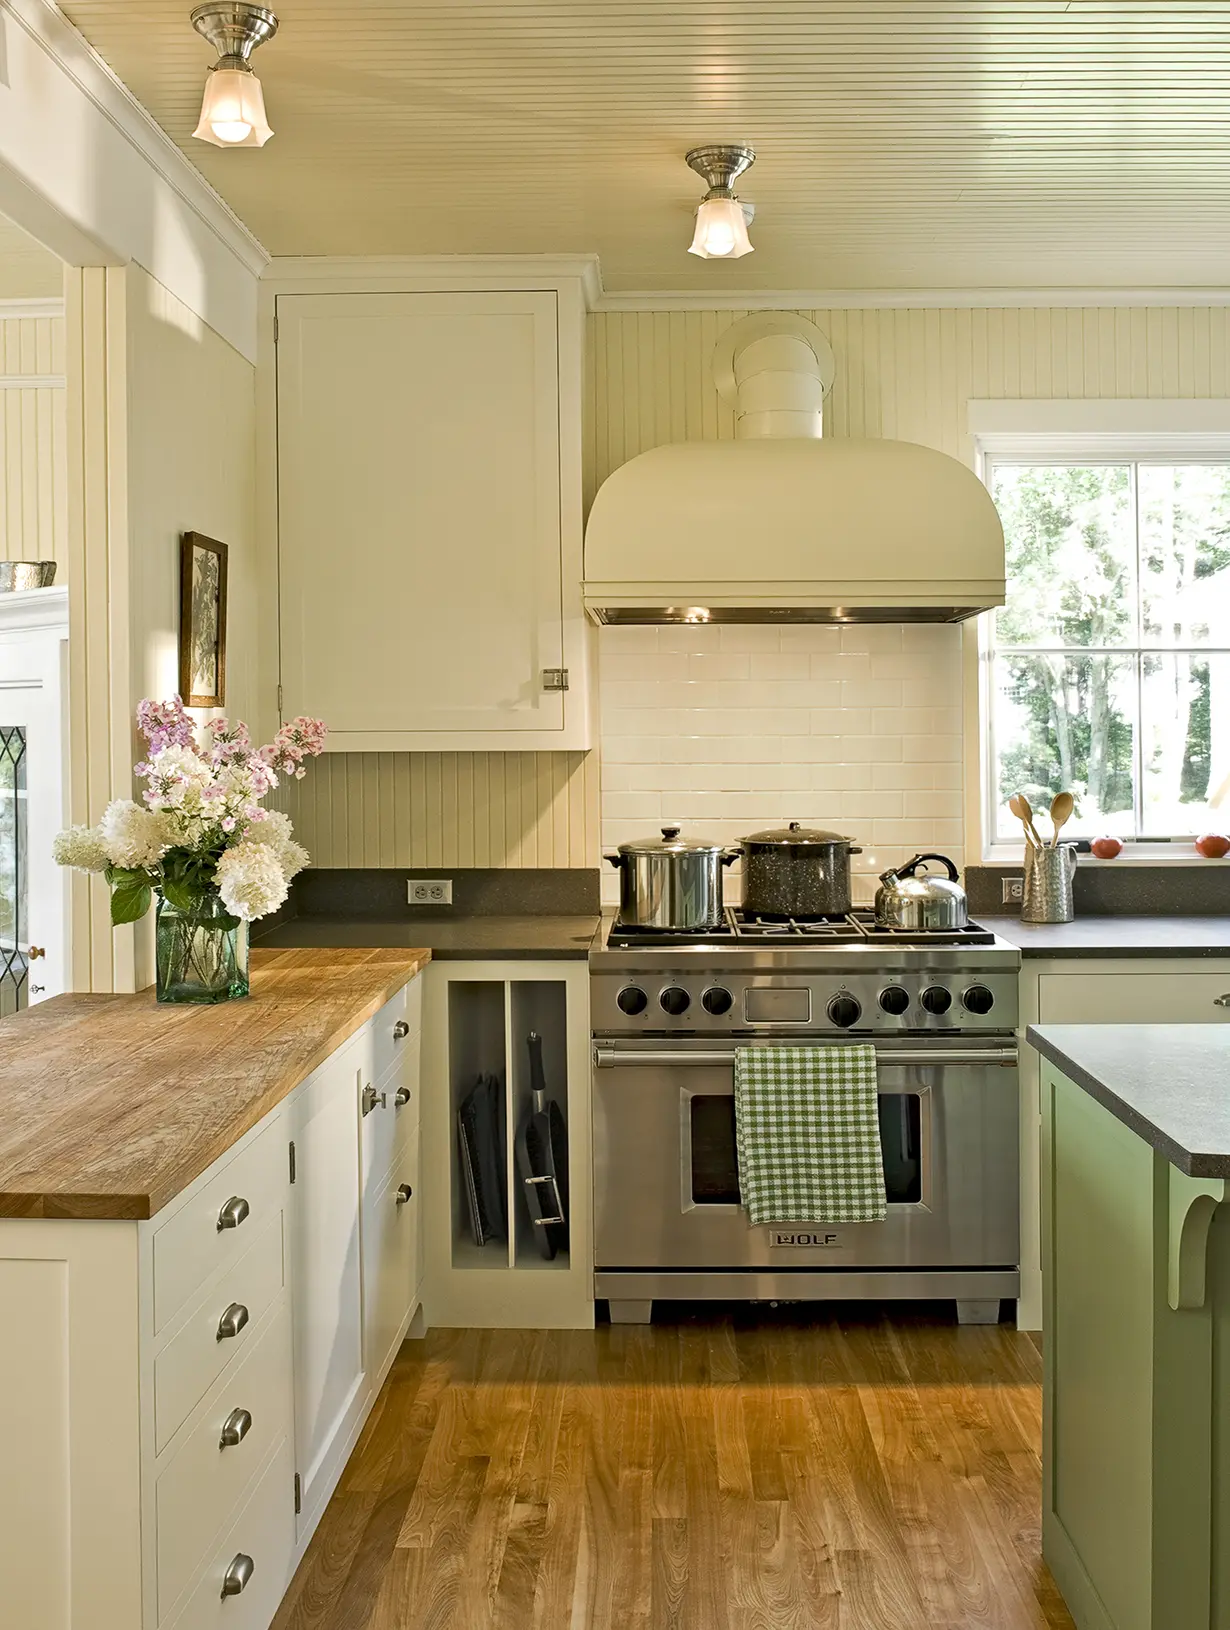 Wood countertop with wood paneled walls and ceiling, and vintage inspired stove top